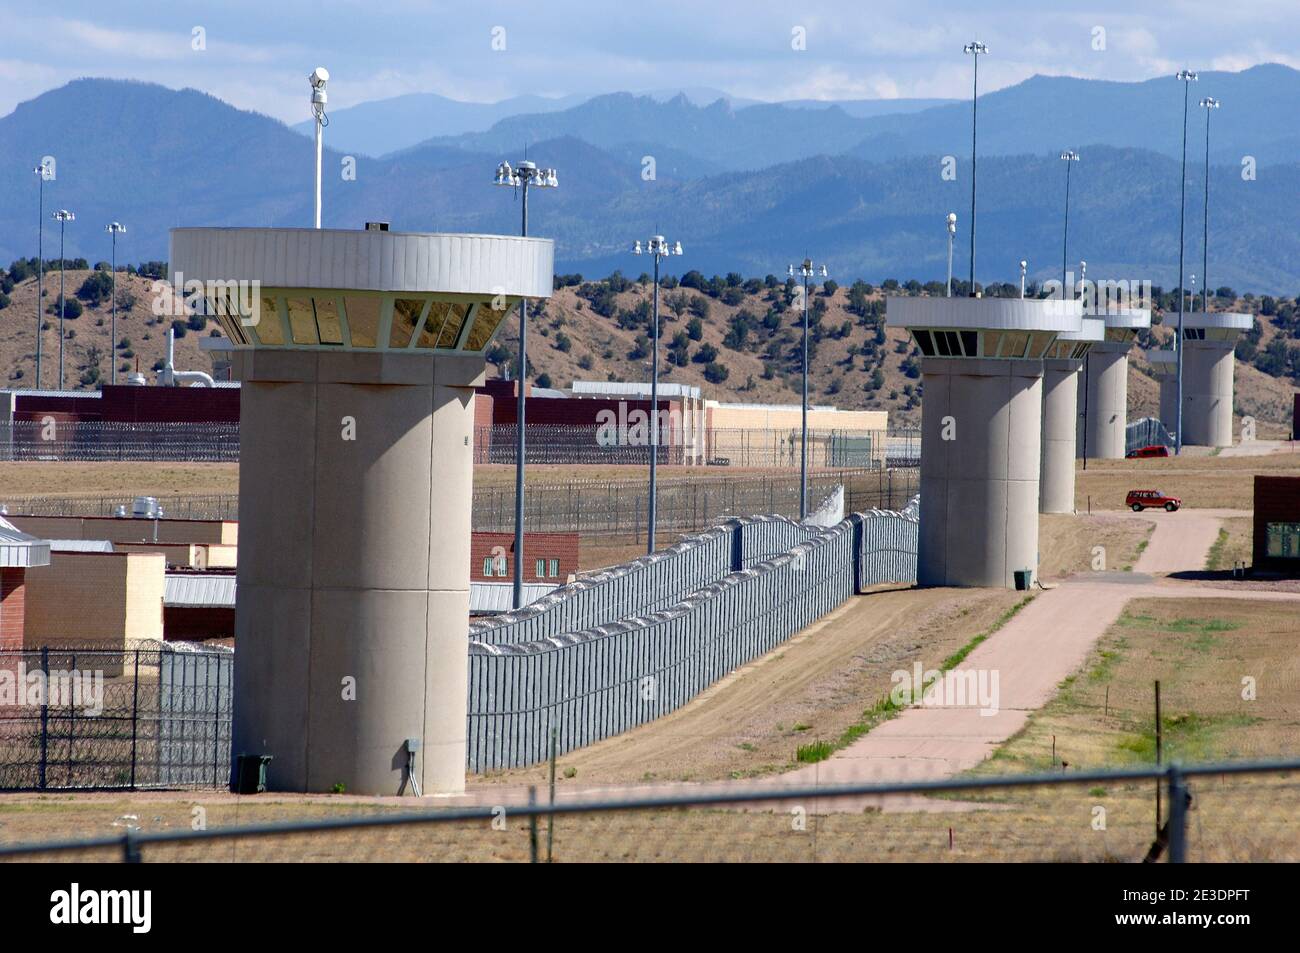 Guard towers surround the federal penitentiary facility known as